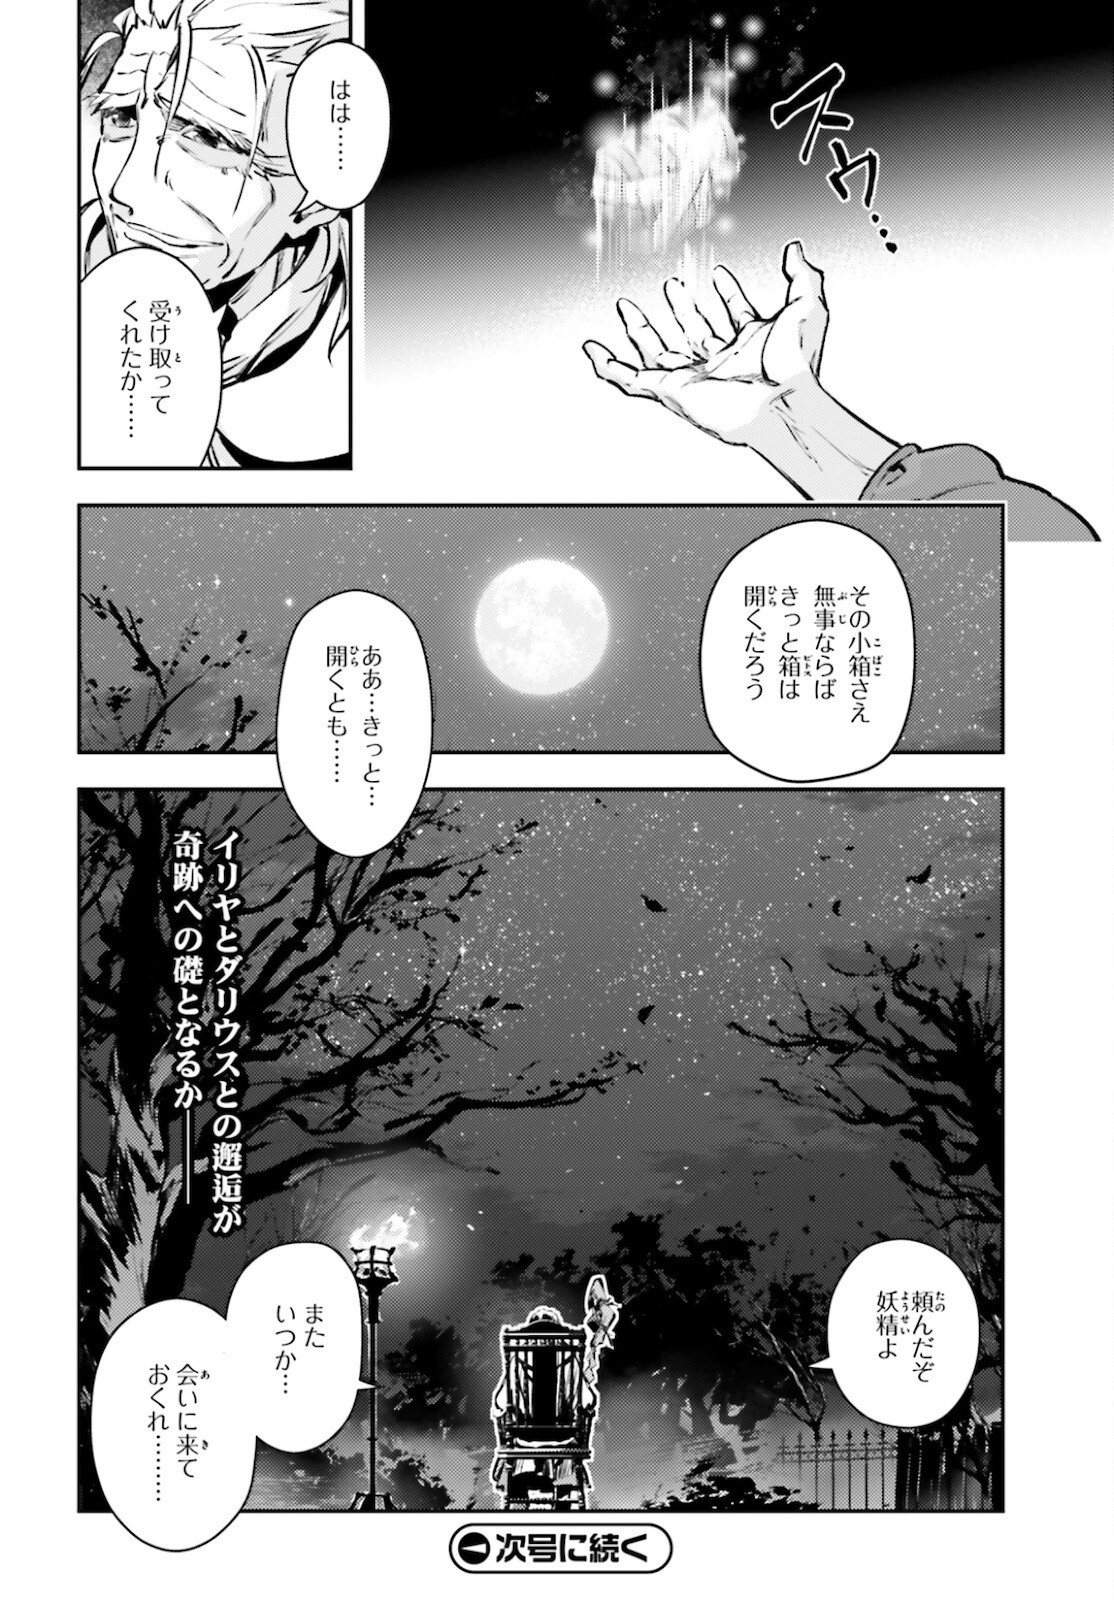 Fate/Kaleid Liner Prisma Illya Drei! - Chapter 65-2 - Page 21